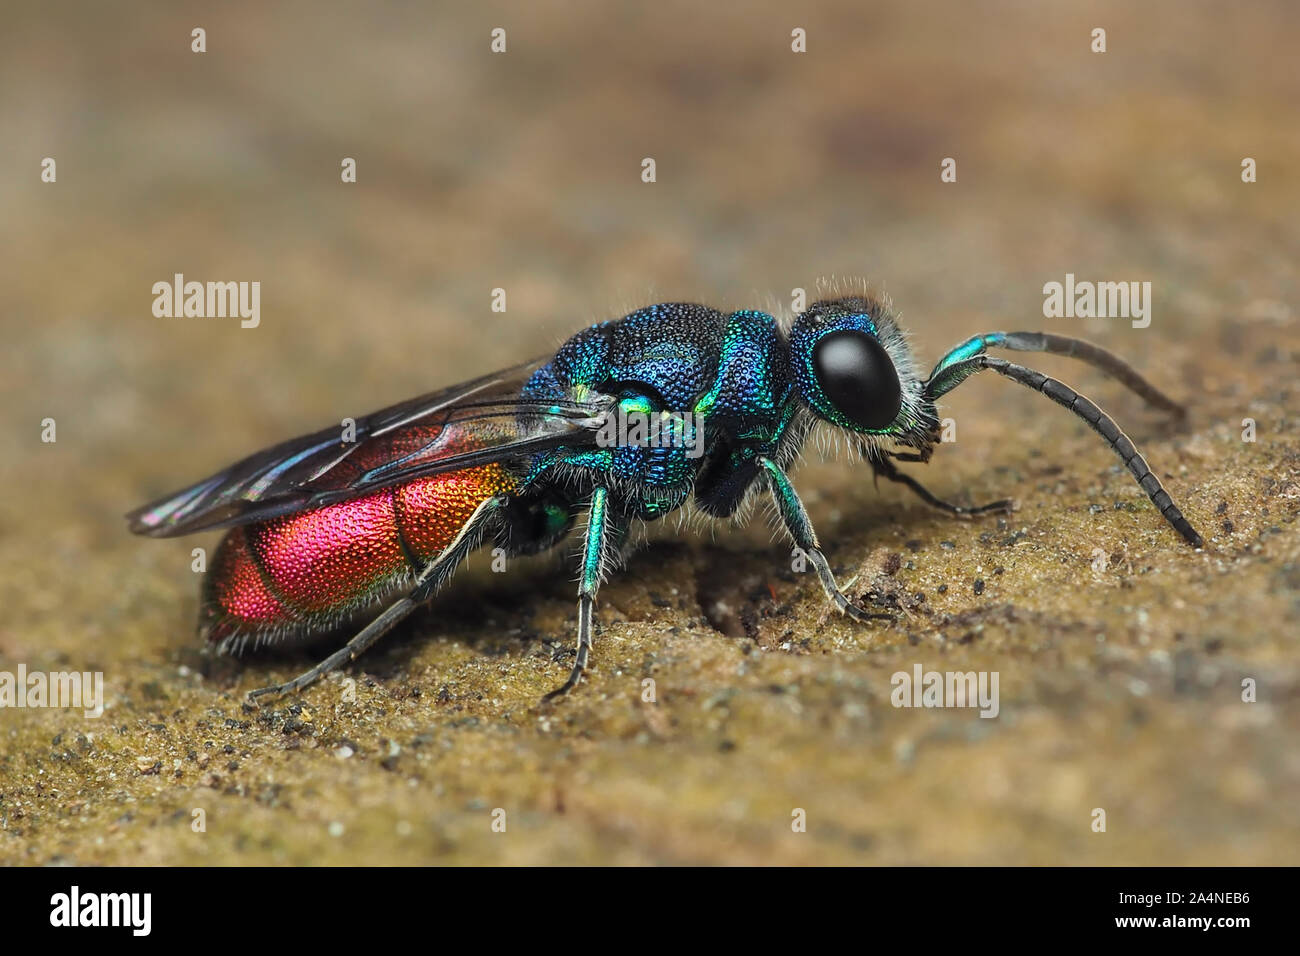 Ruby-tailed Wasp resting on wooden plank. Tipperary, Ireland Stock Photo